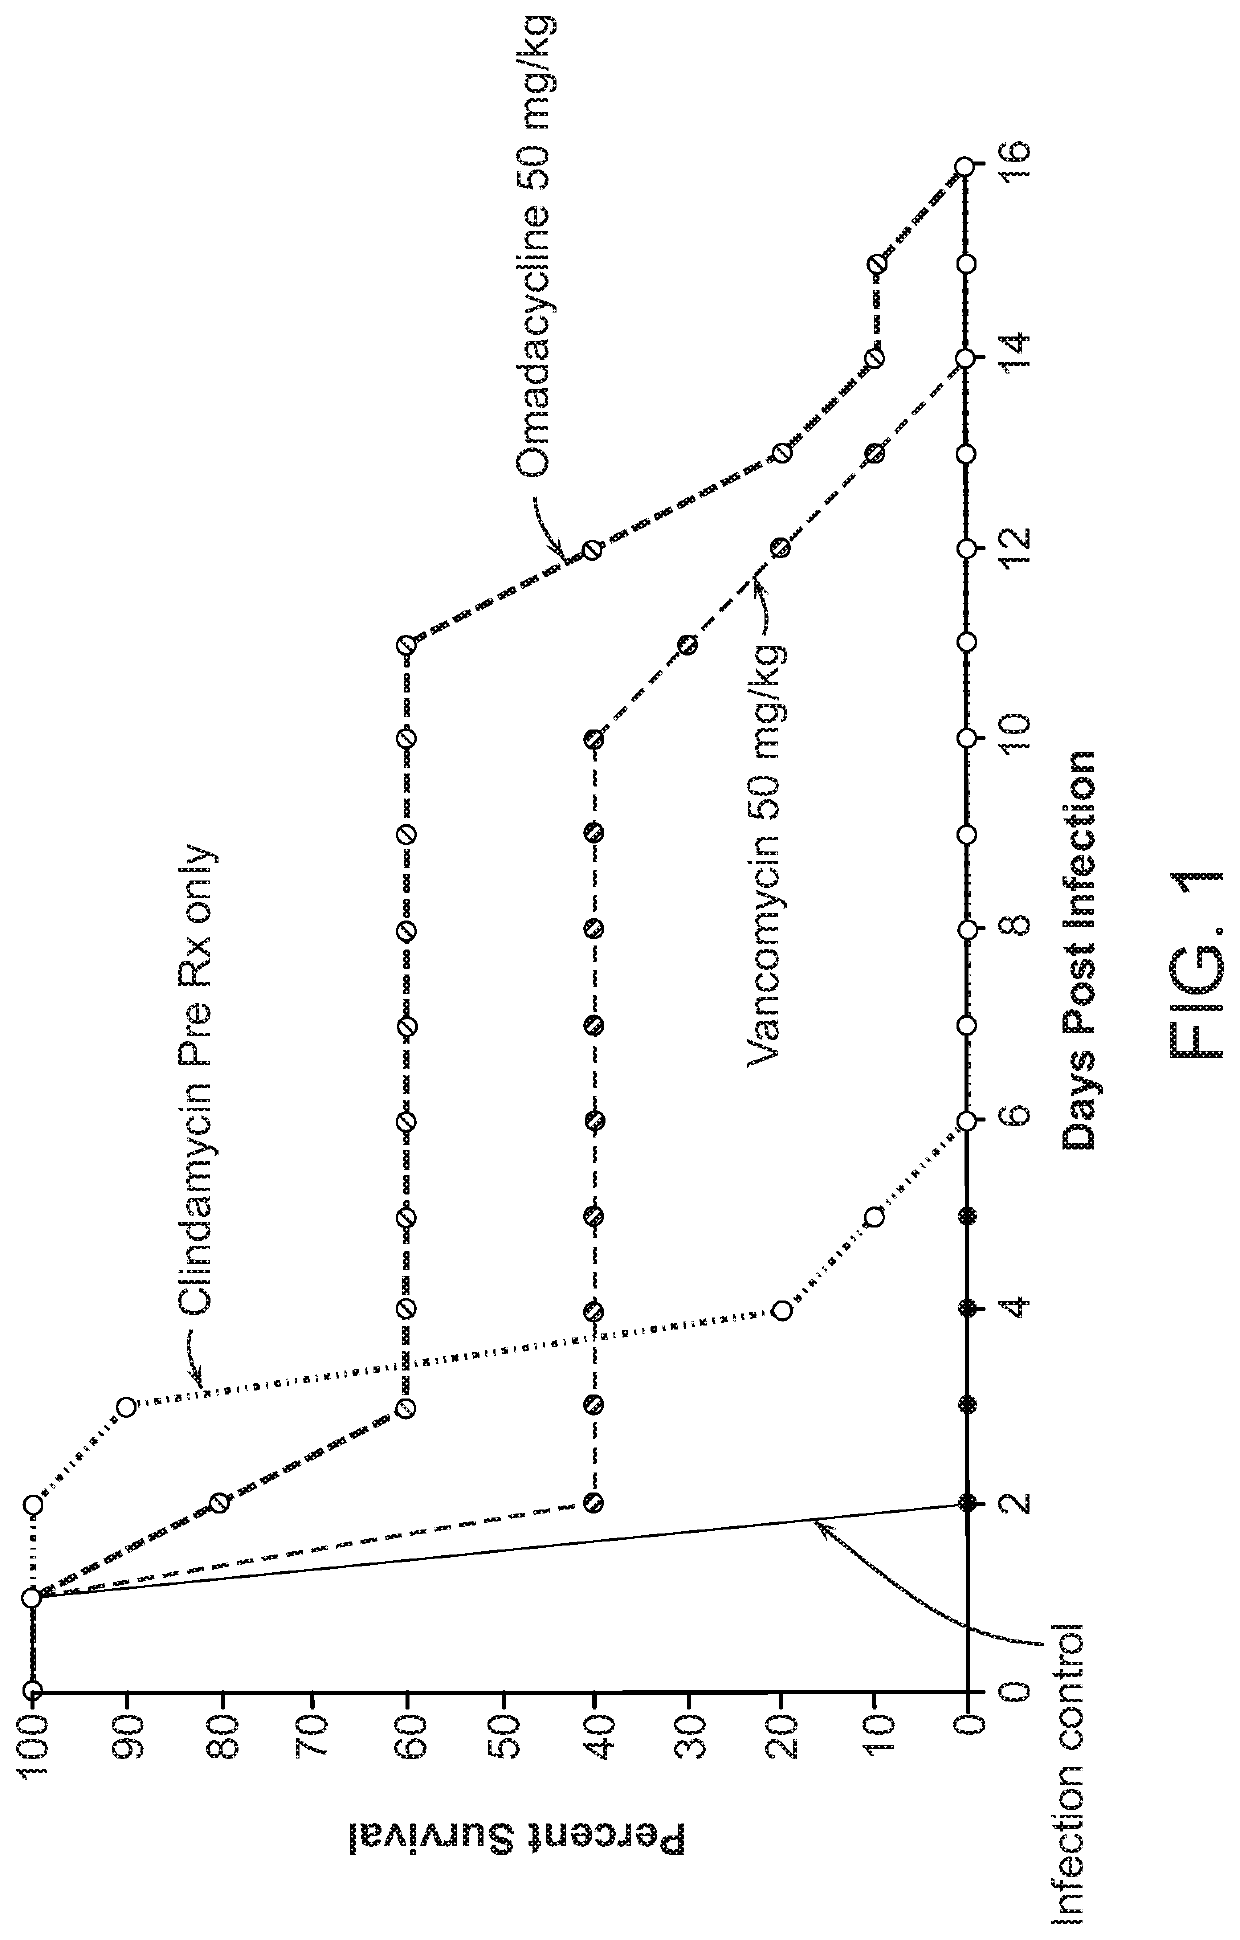 Methods for treating and preventing c. difficile infection